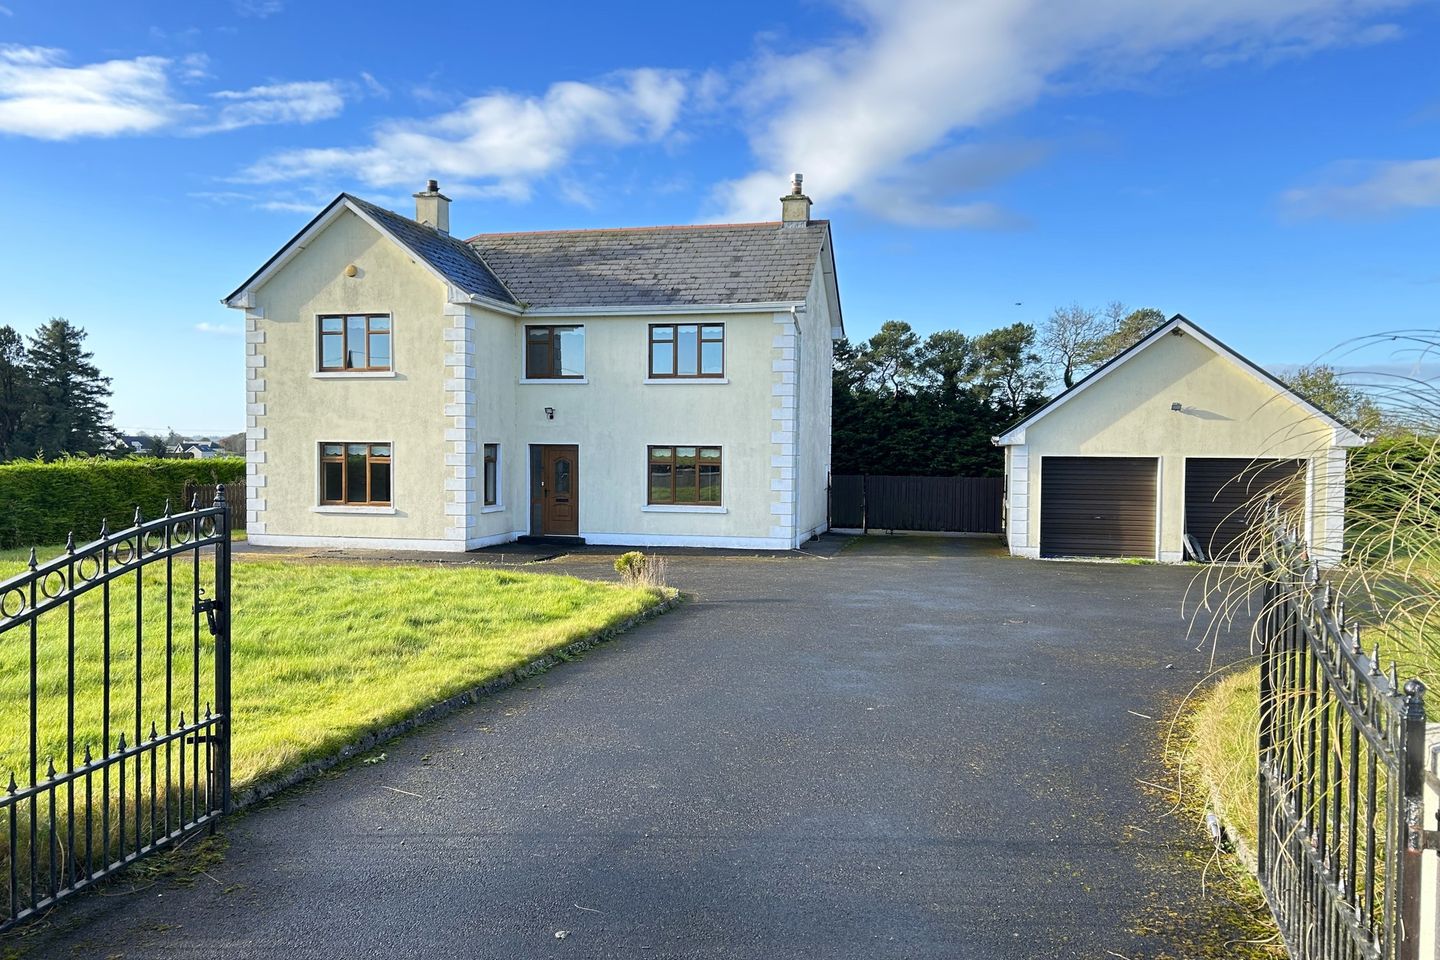 Brierfield South, Moylough, Co. Galway, H53PX94